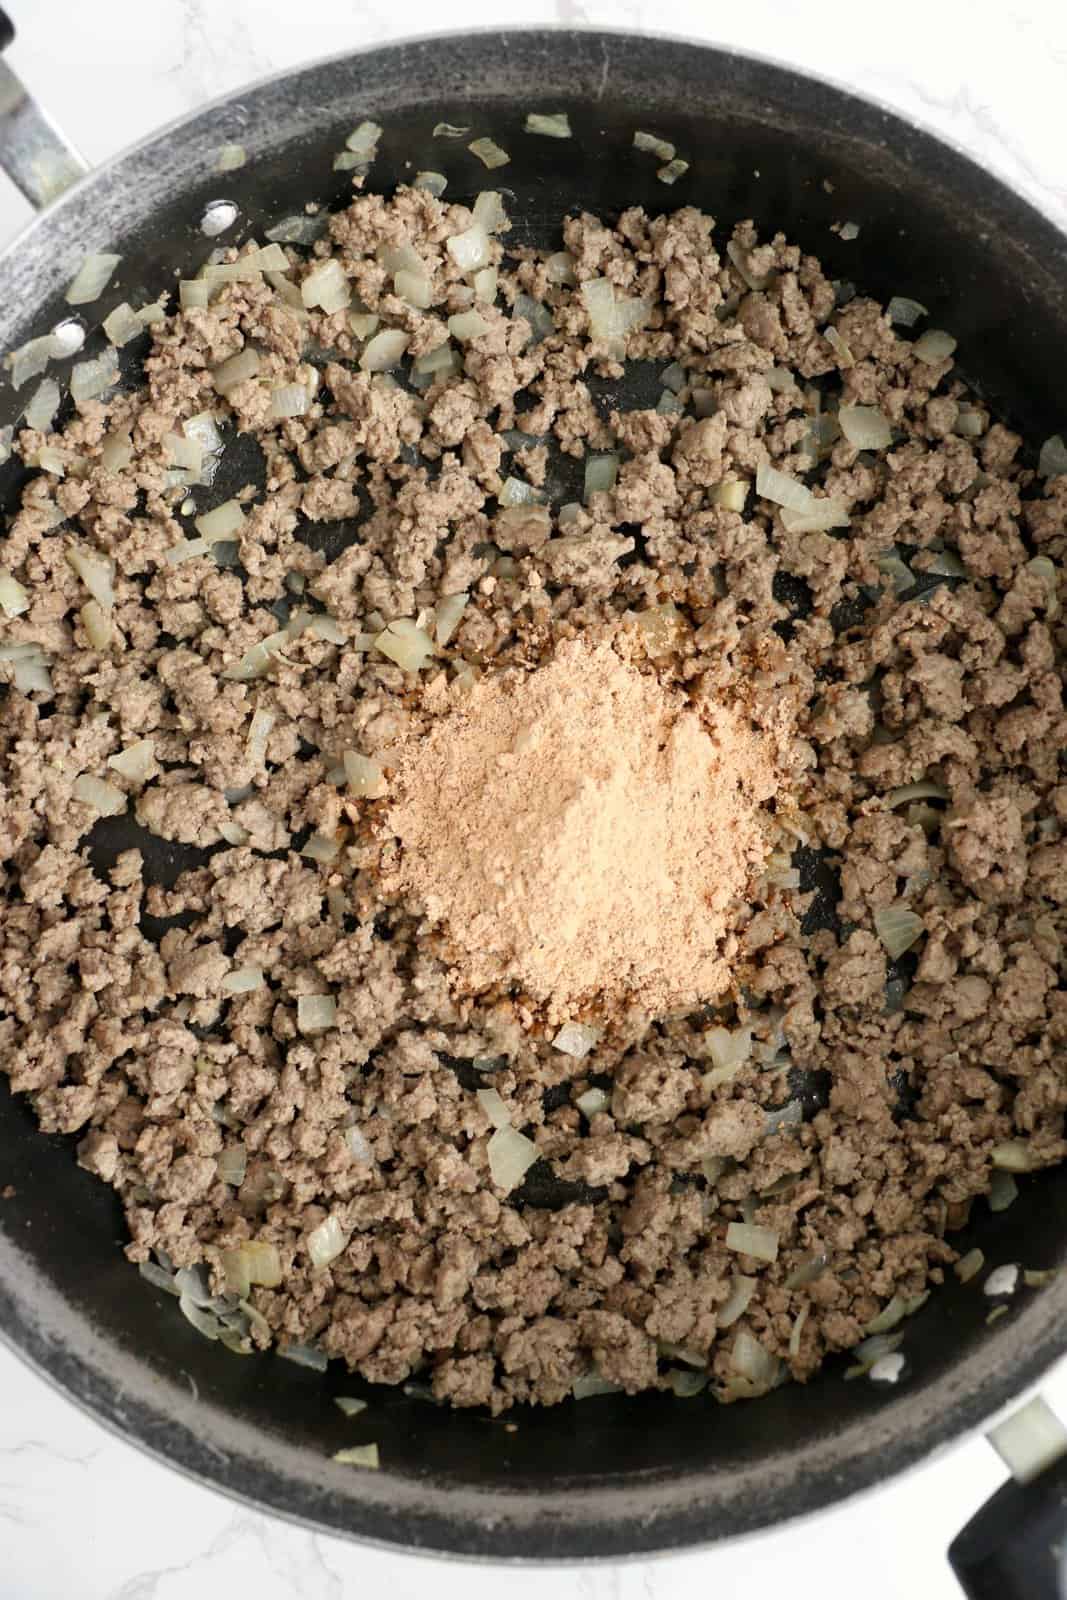 Dry spaghetti sauce mix added to ground beef mixture.